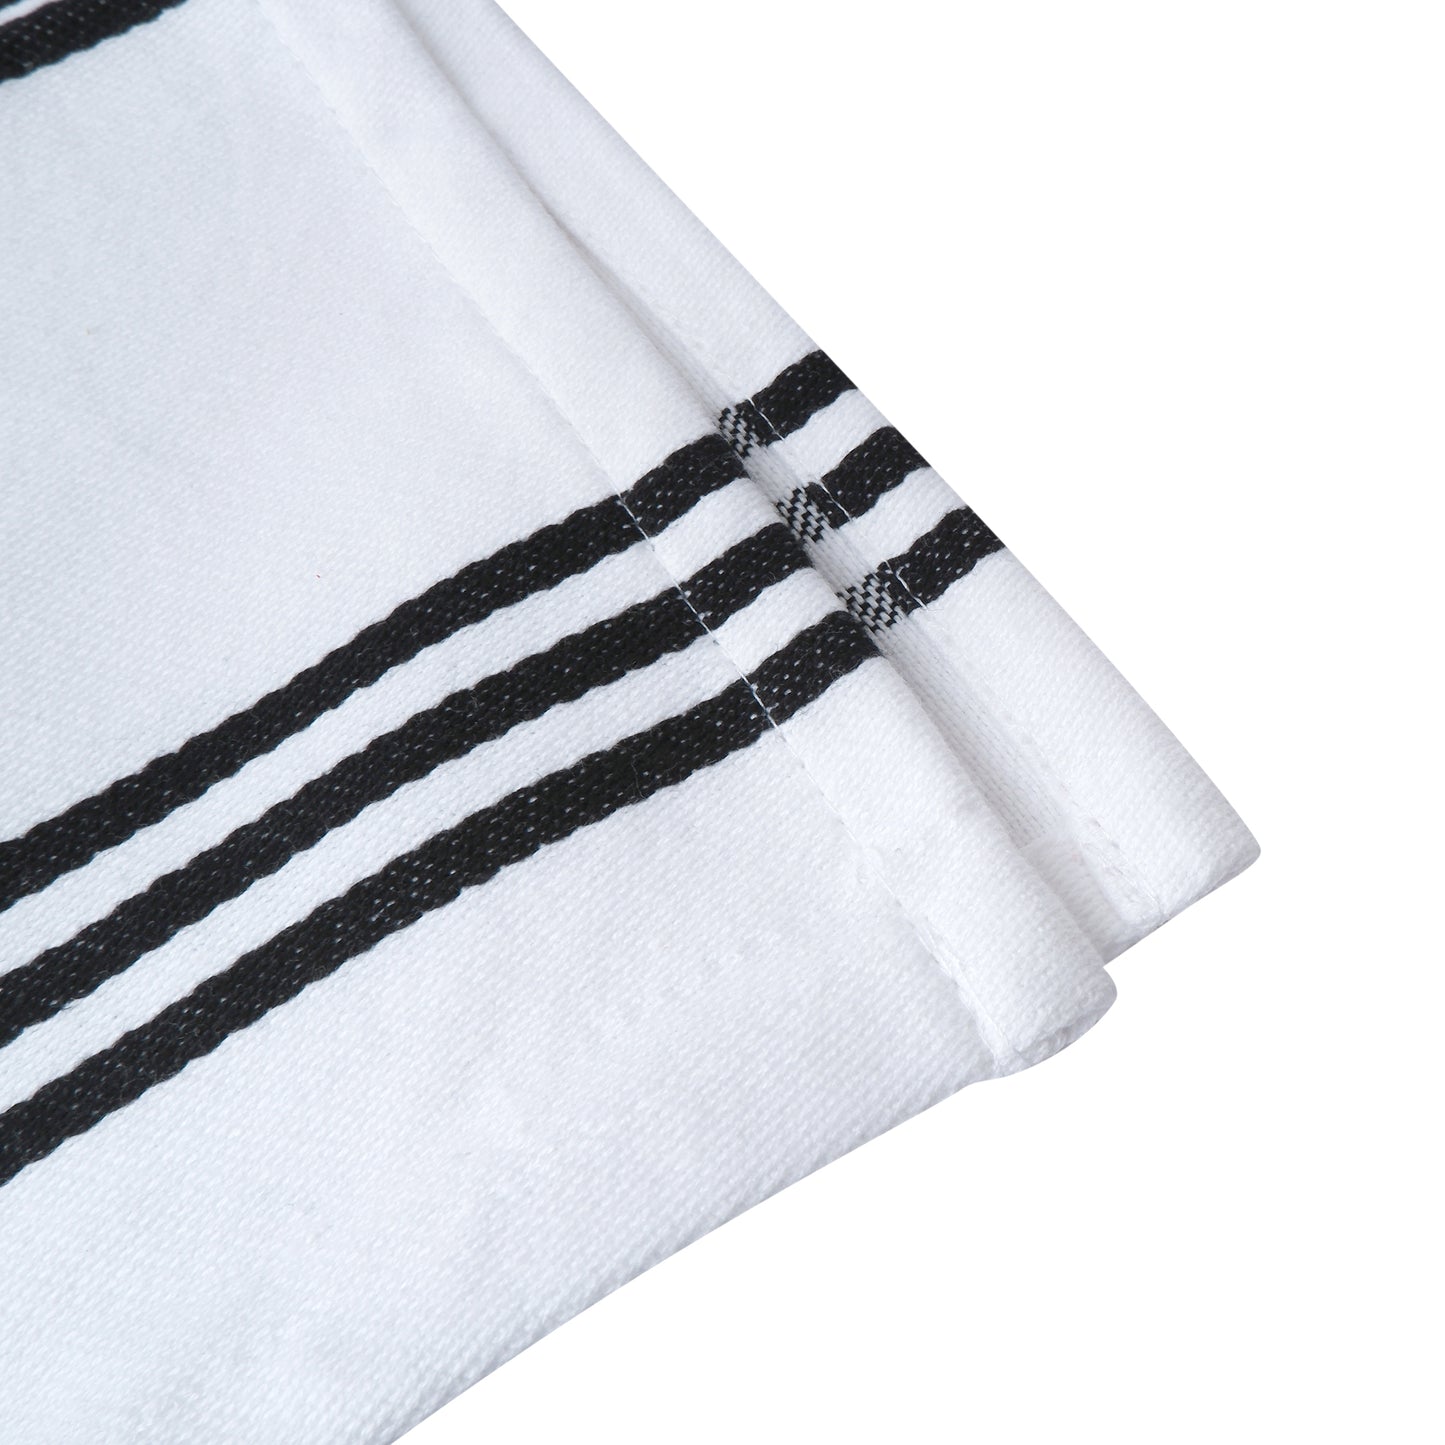 Set of 6 Striped 100% Cotton Dish Towels for Kitchen Tea Hand Towels 20x30 Inch Multi Color Options